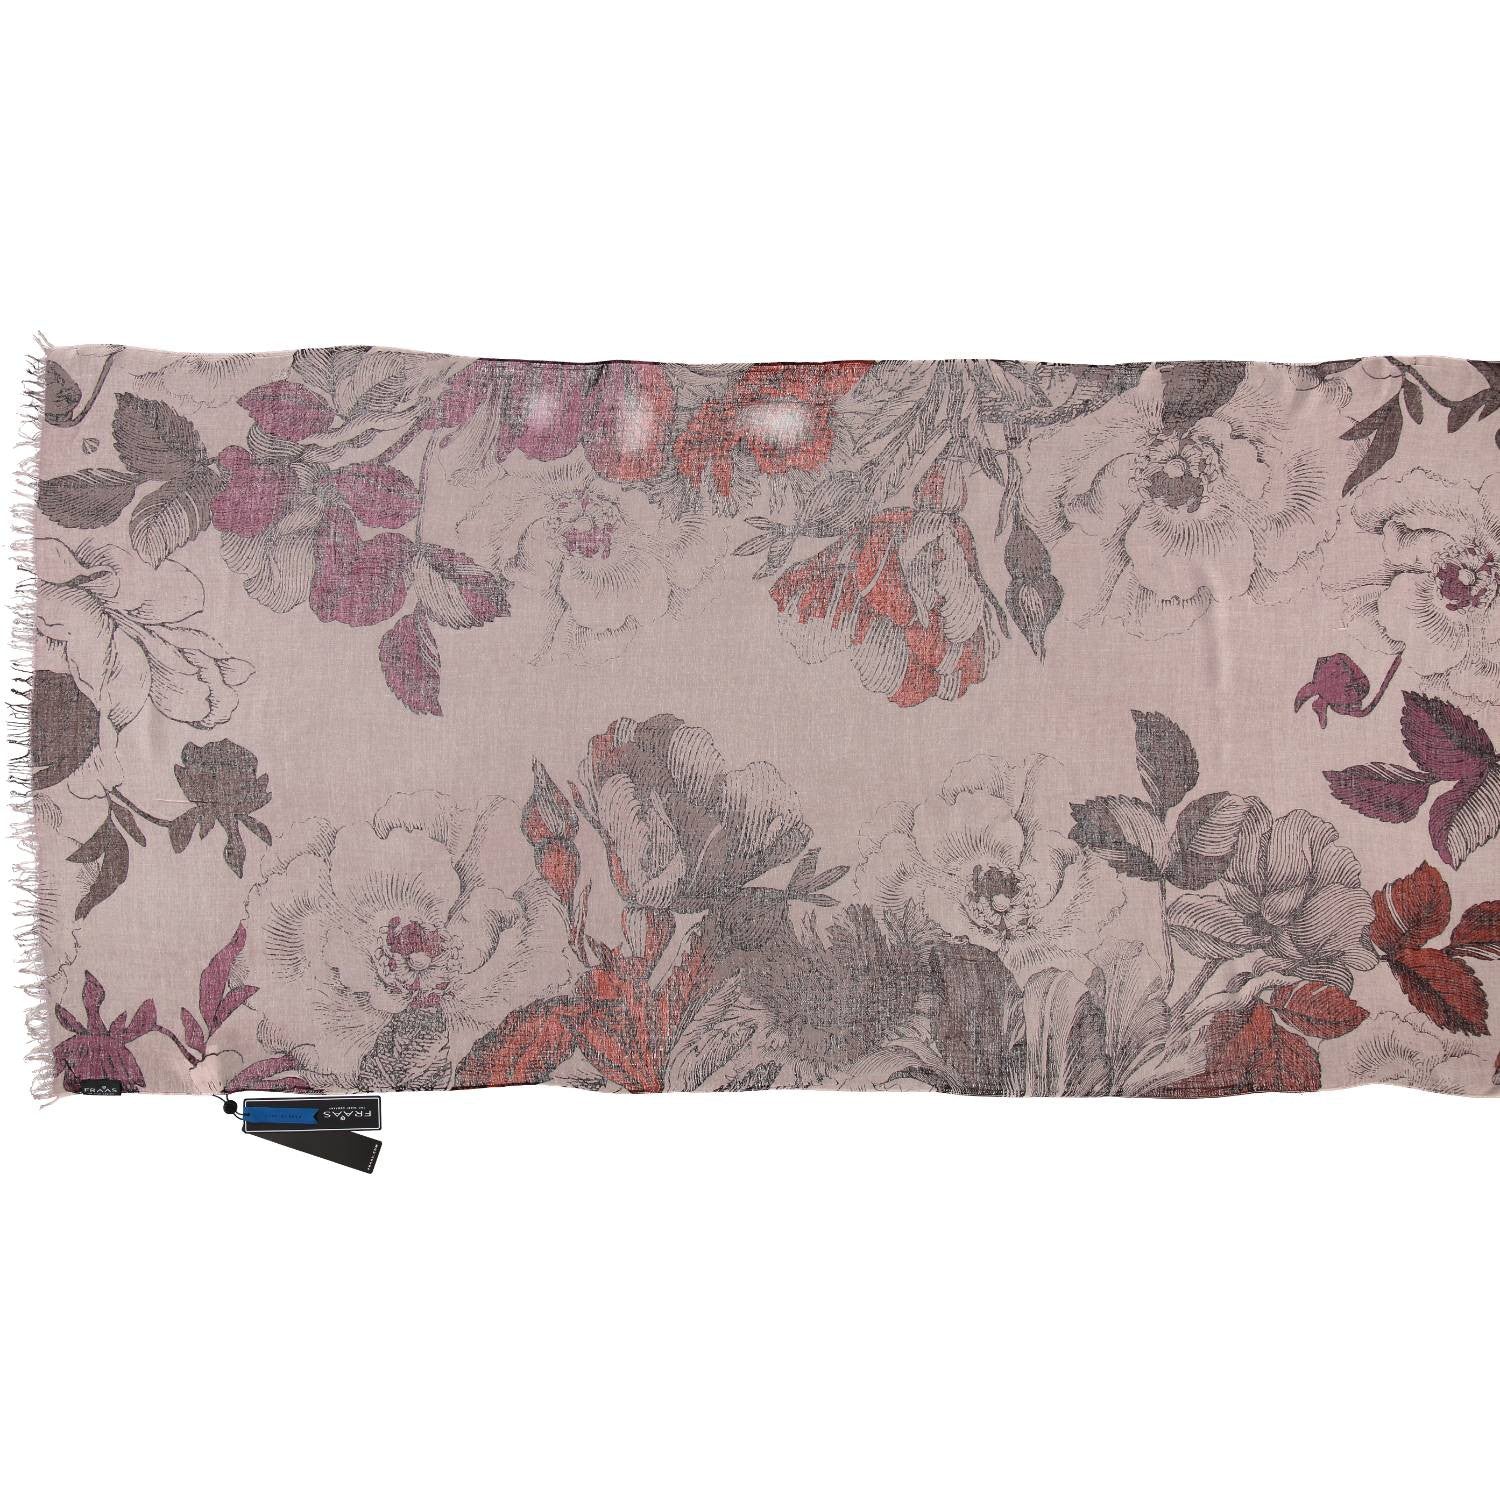 V. Fraas Pure Viscose “Color Me Floral” Scarf – Made in Italy - ZETA Shop